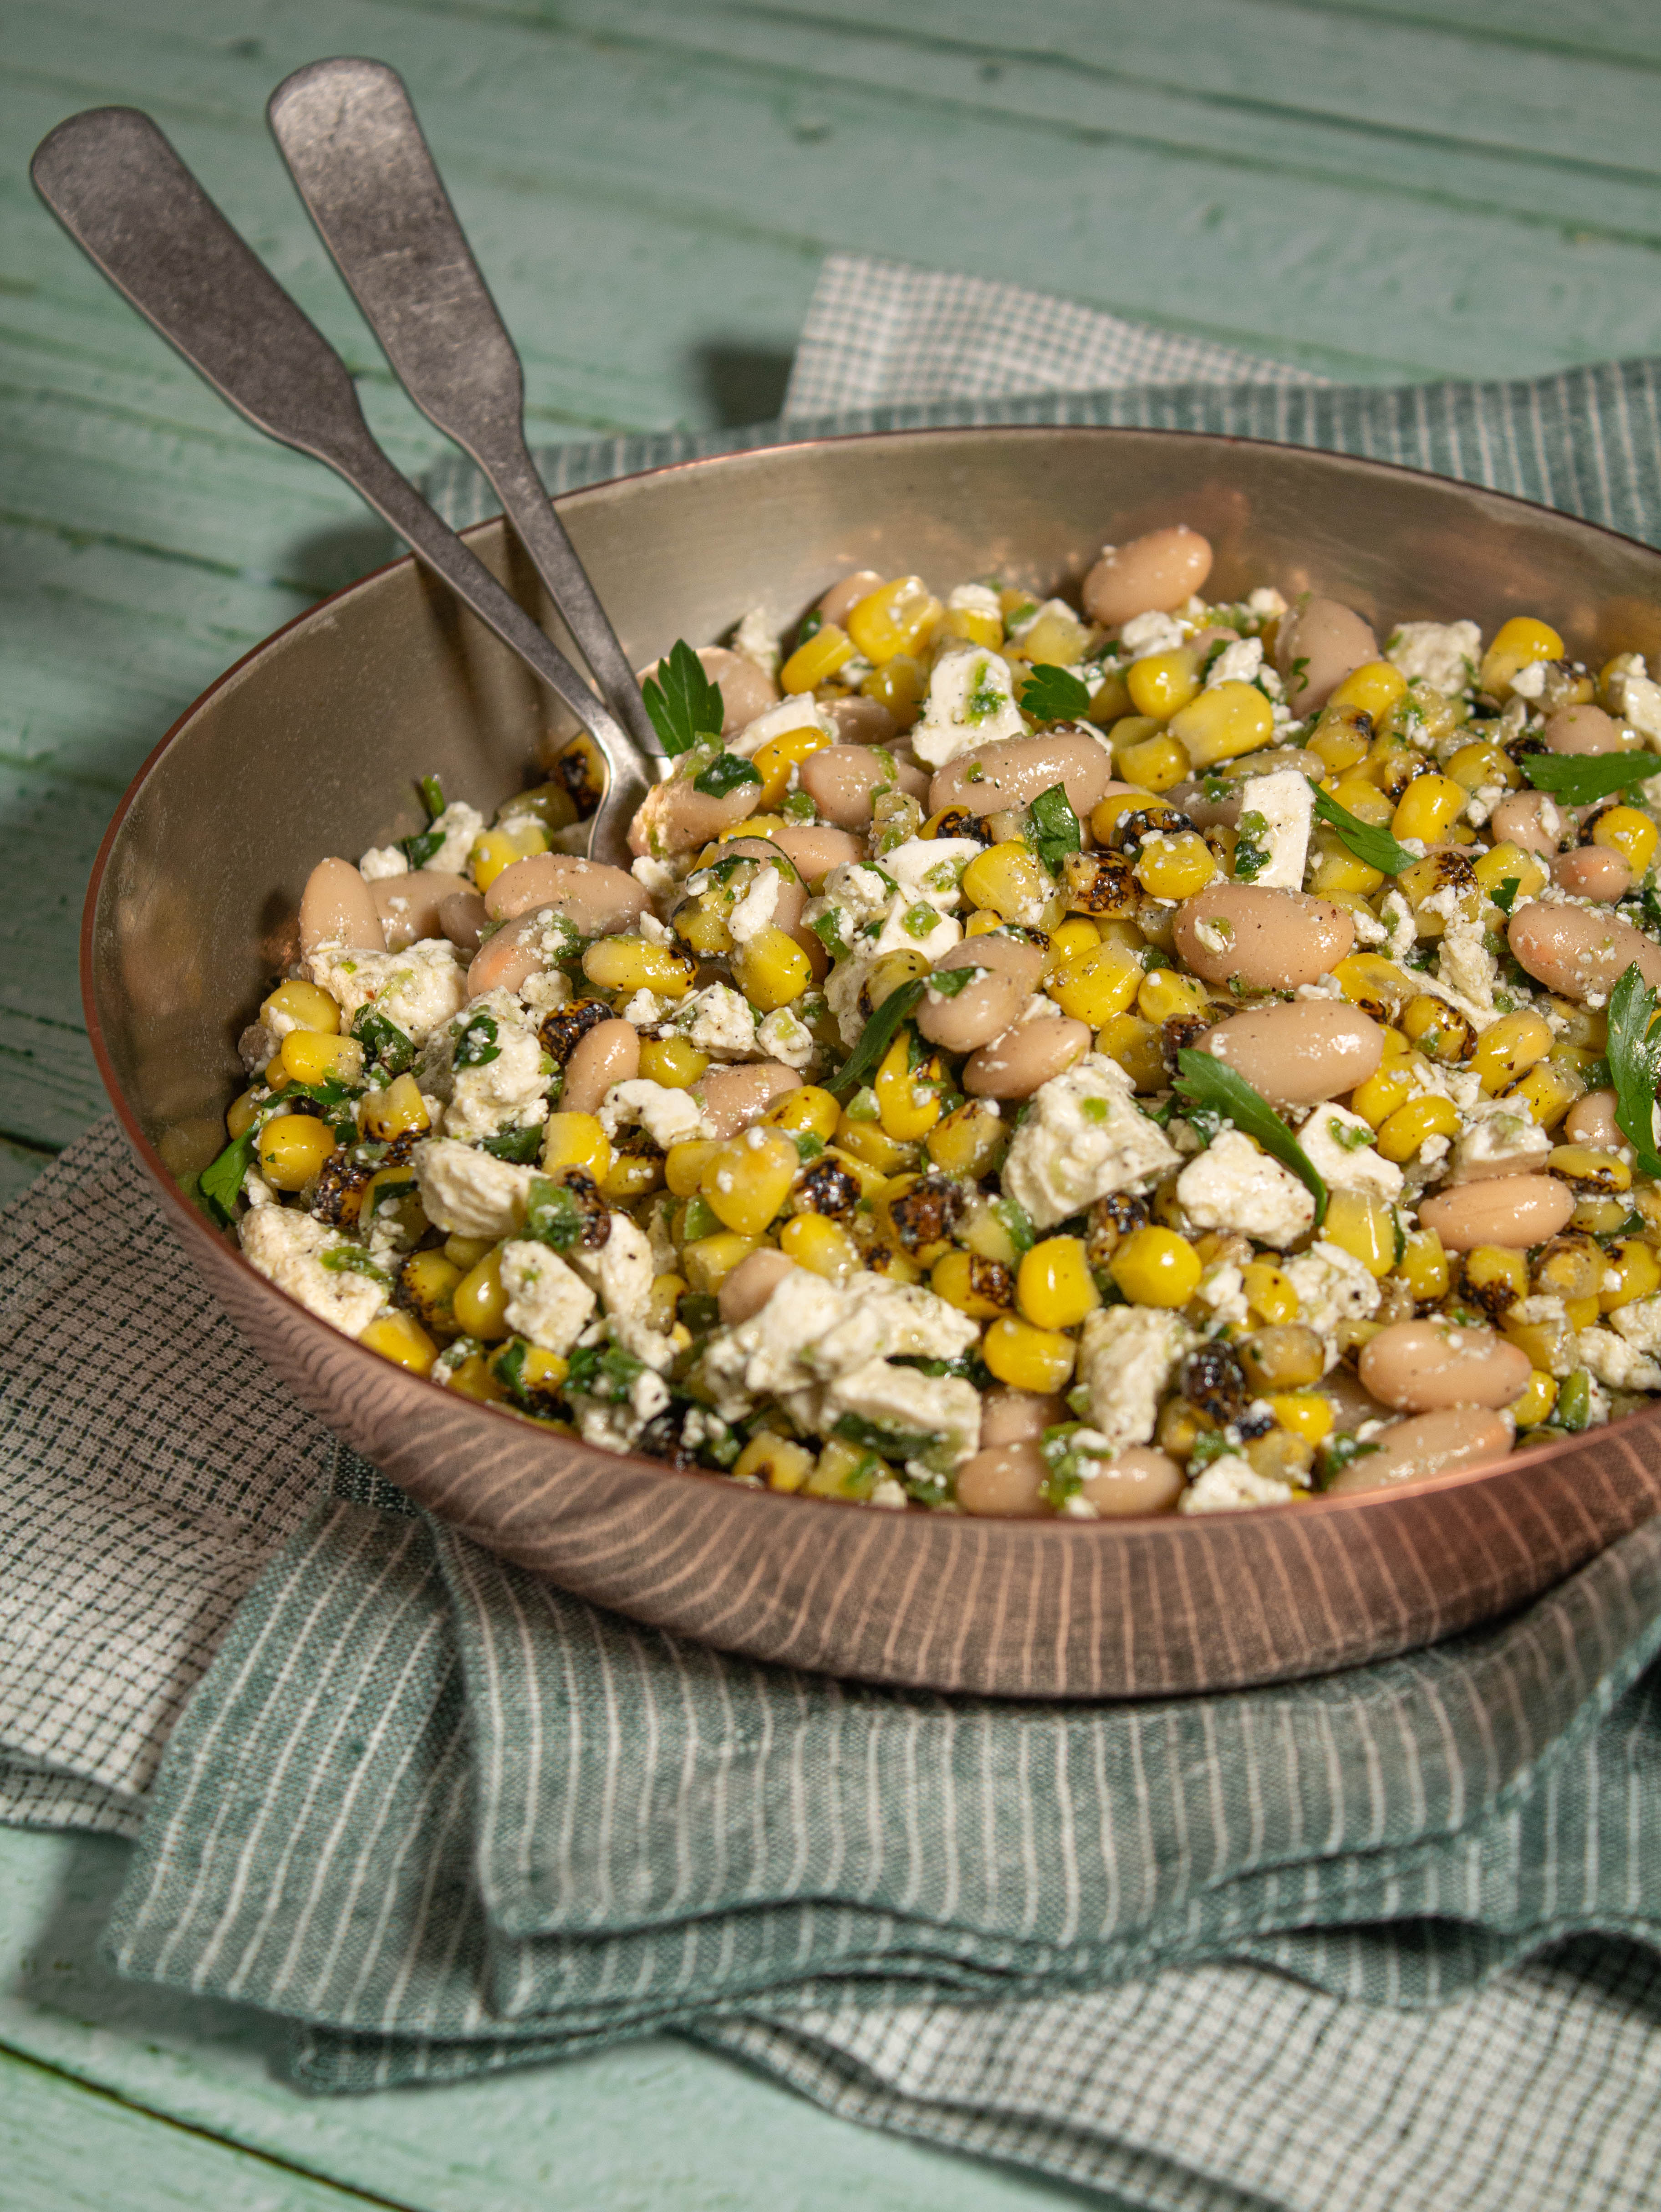 Copper pot sitting on green napkins filled with roasted corn, beans, crumbled cheese and cilantro.